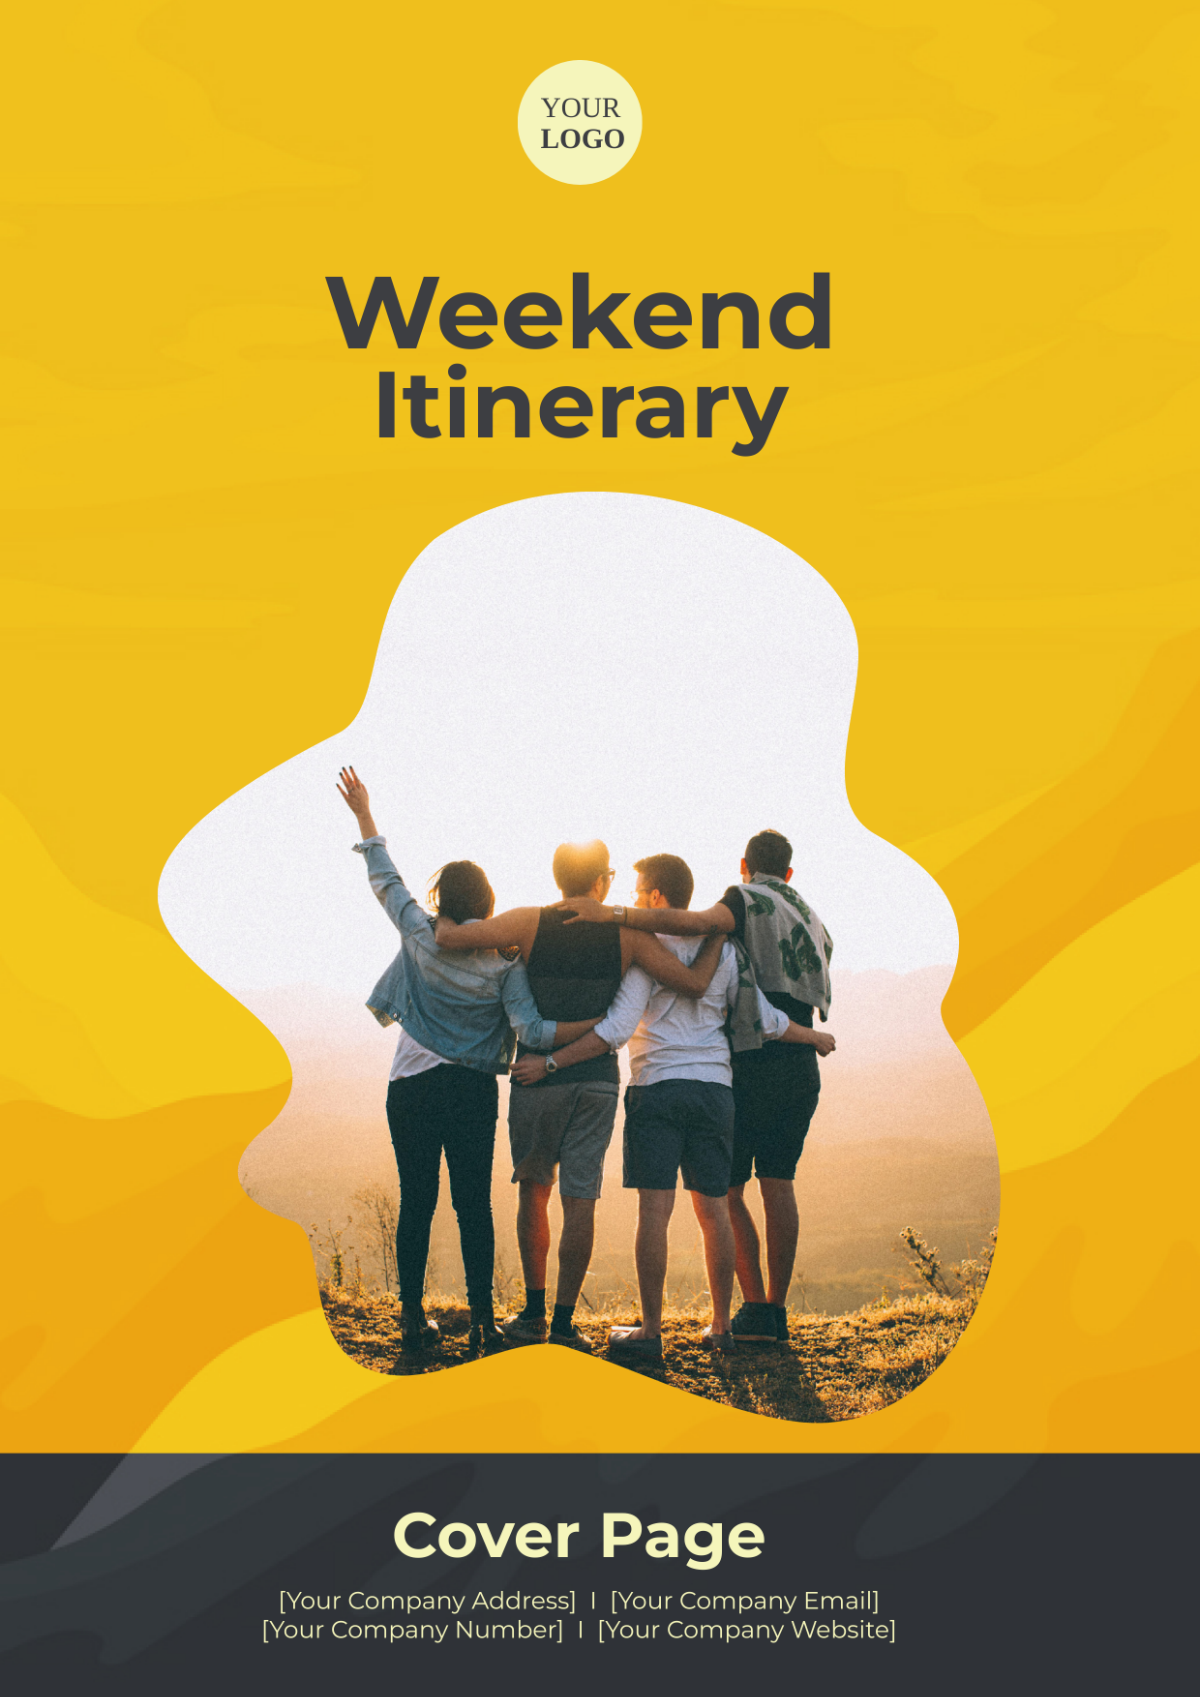 Weekend Itinerary Cover Page